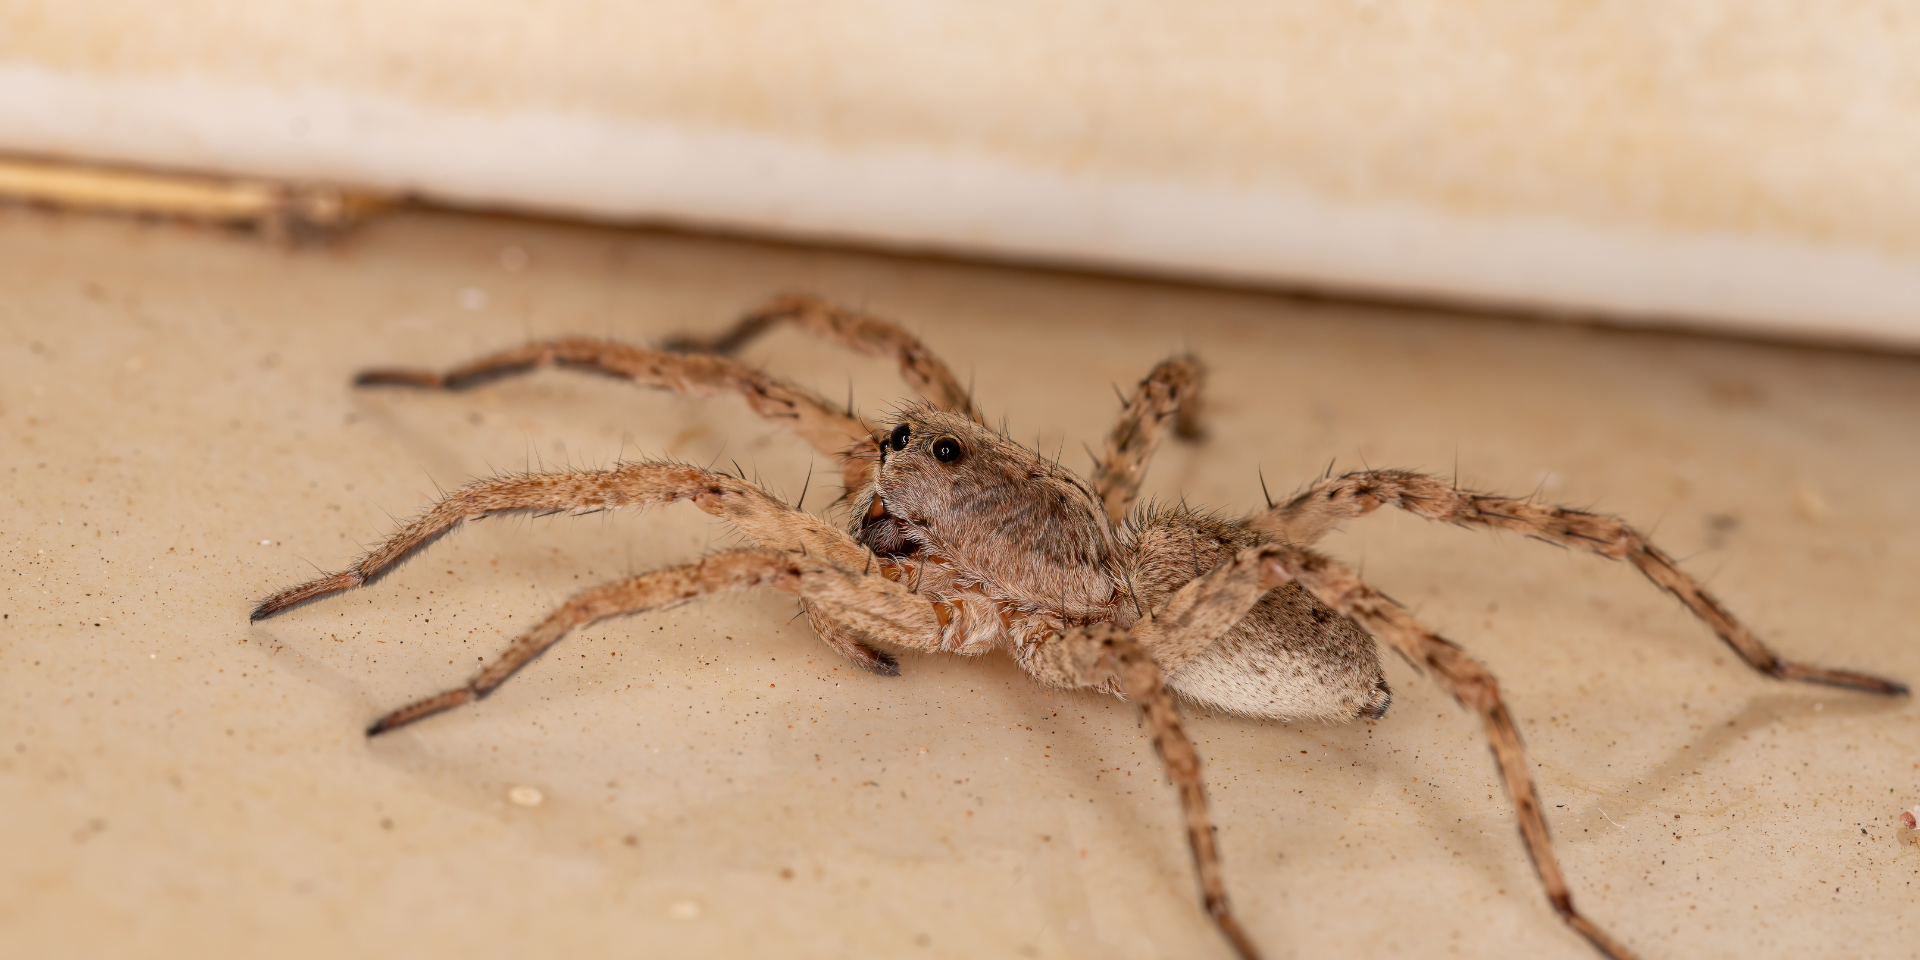 Wolf spiders are large and hairy